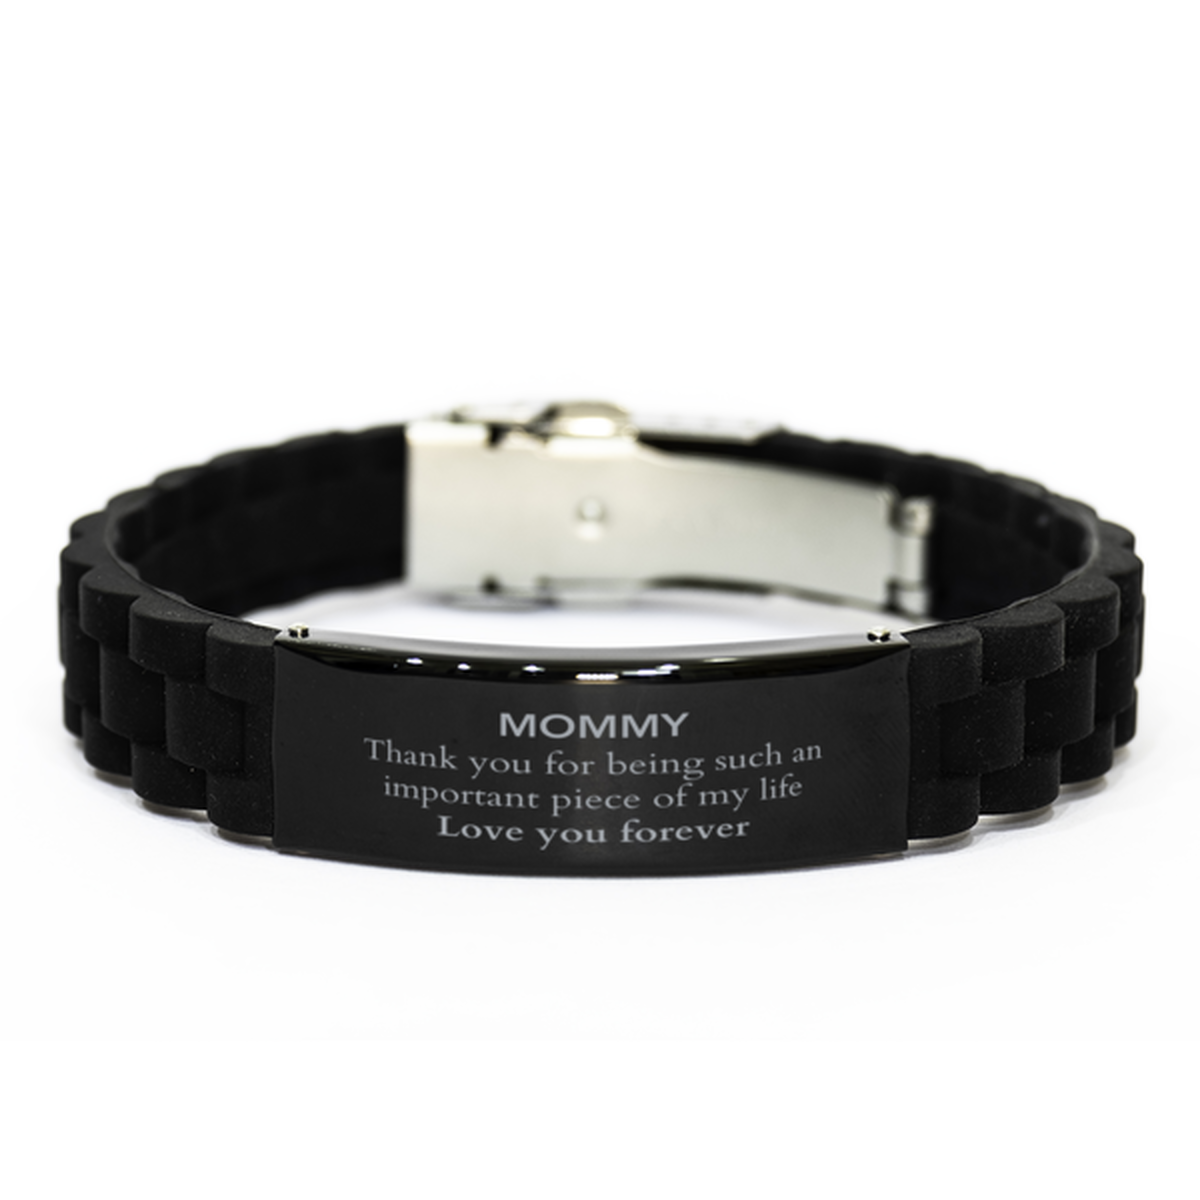 Appropriate Mommy Black Glidelock Clasp Bracelet Epic Birthday Gifts for Mommy Thank you for being such an important piece of my life Mommy Christmas Mothers Fathers Day